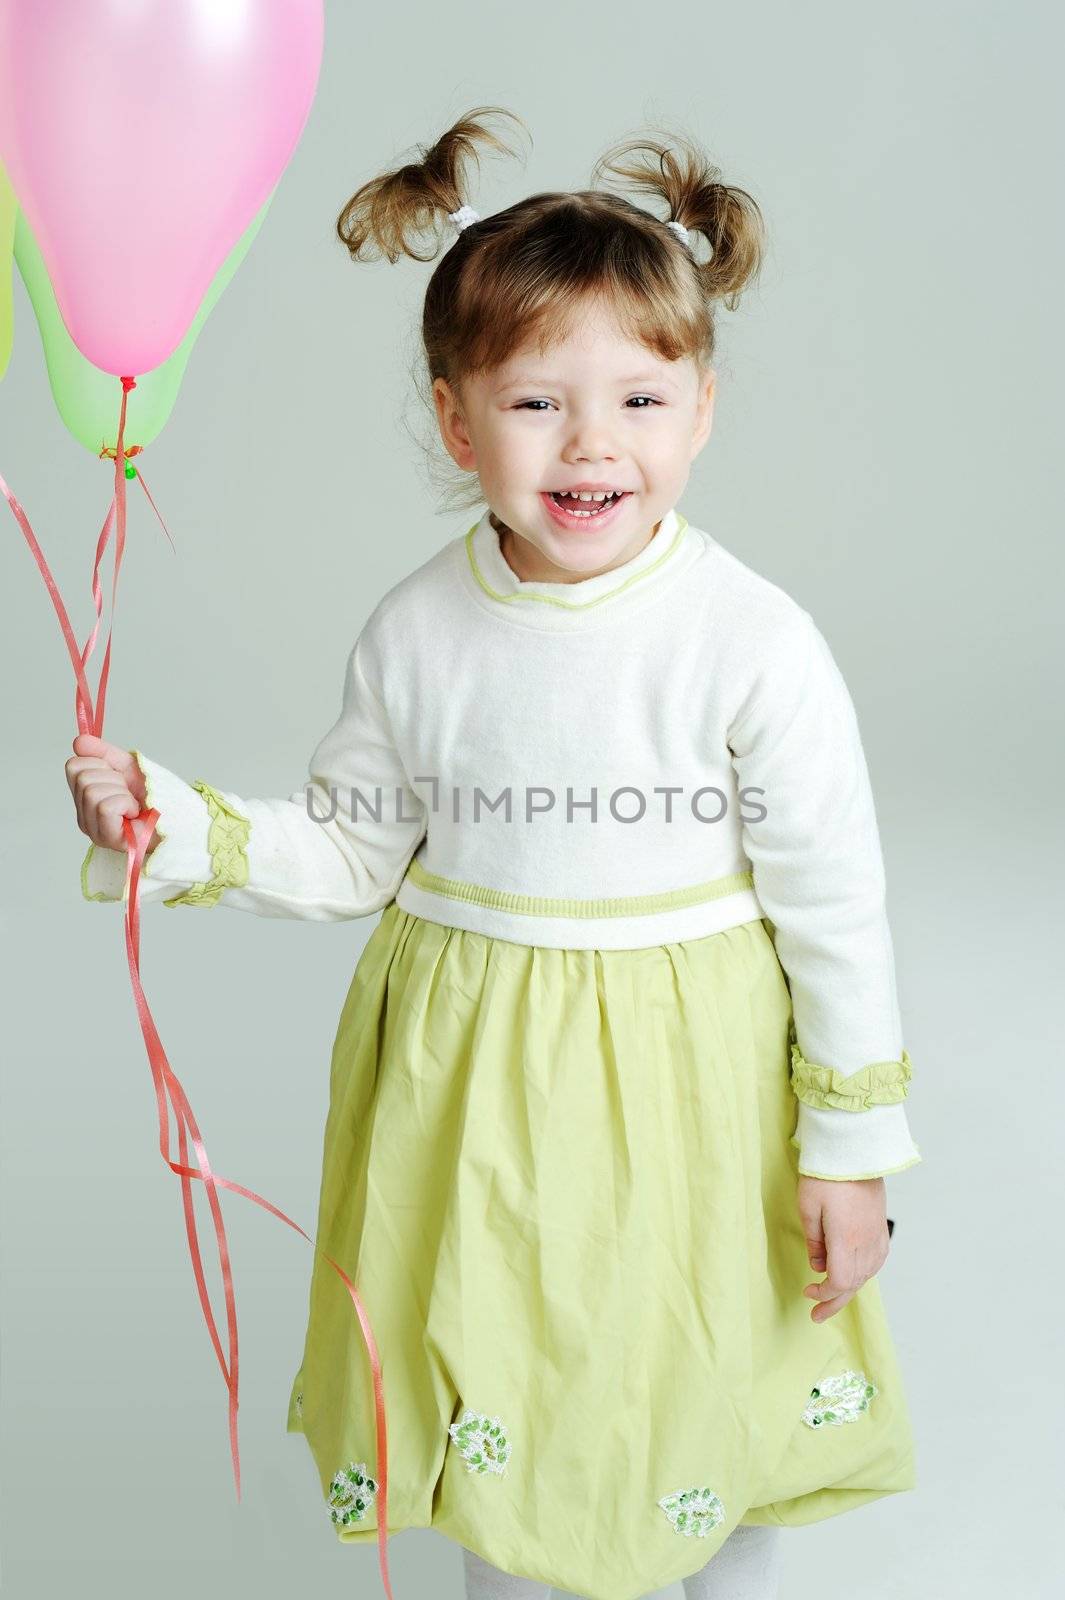 A portrait of a gay little girl with balloons